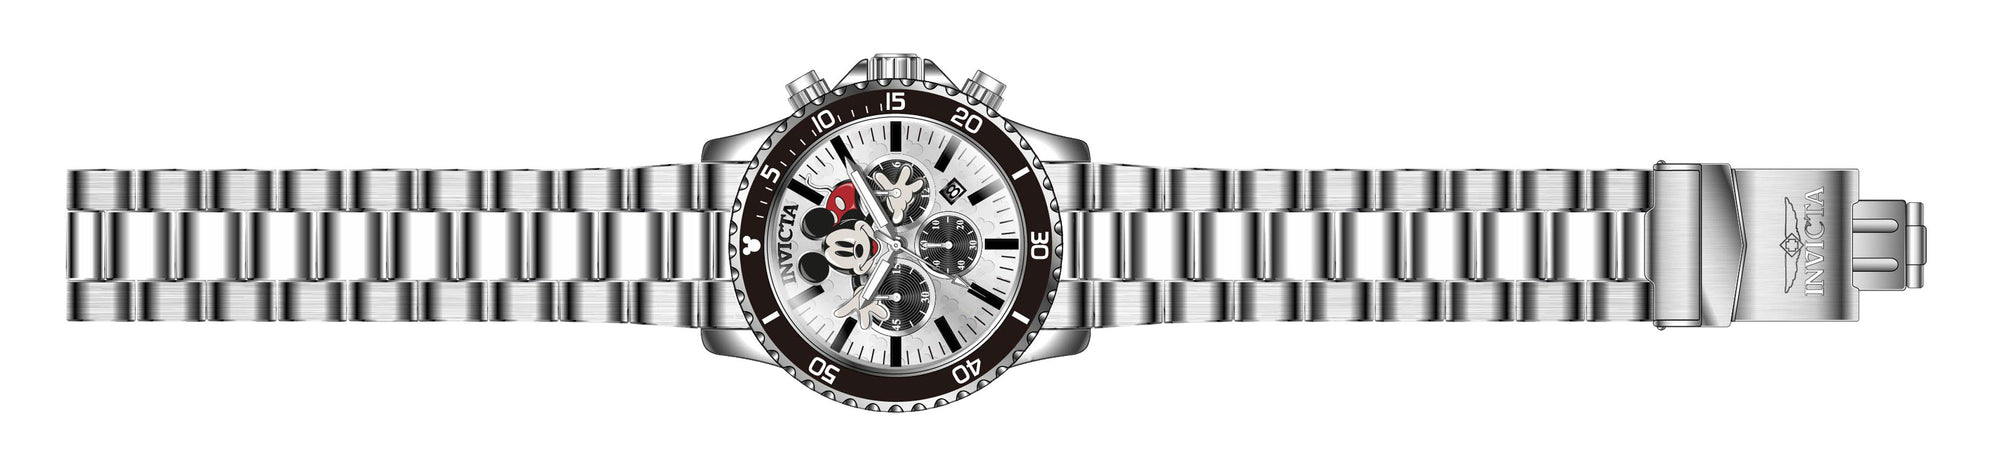 Band for Invicta Disney Limited Edition Mickey Mouse Men 39049